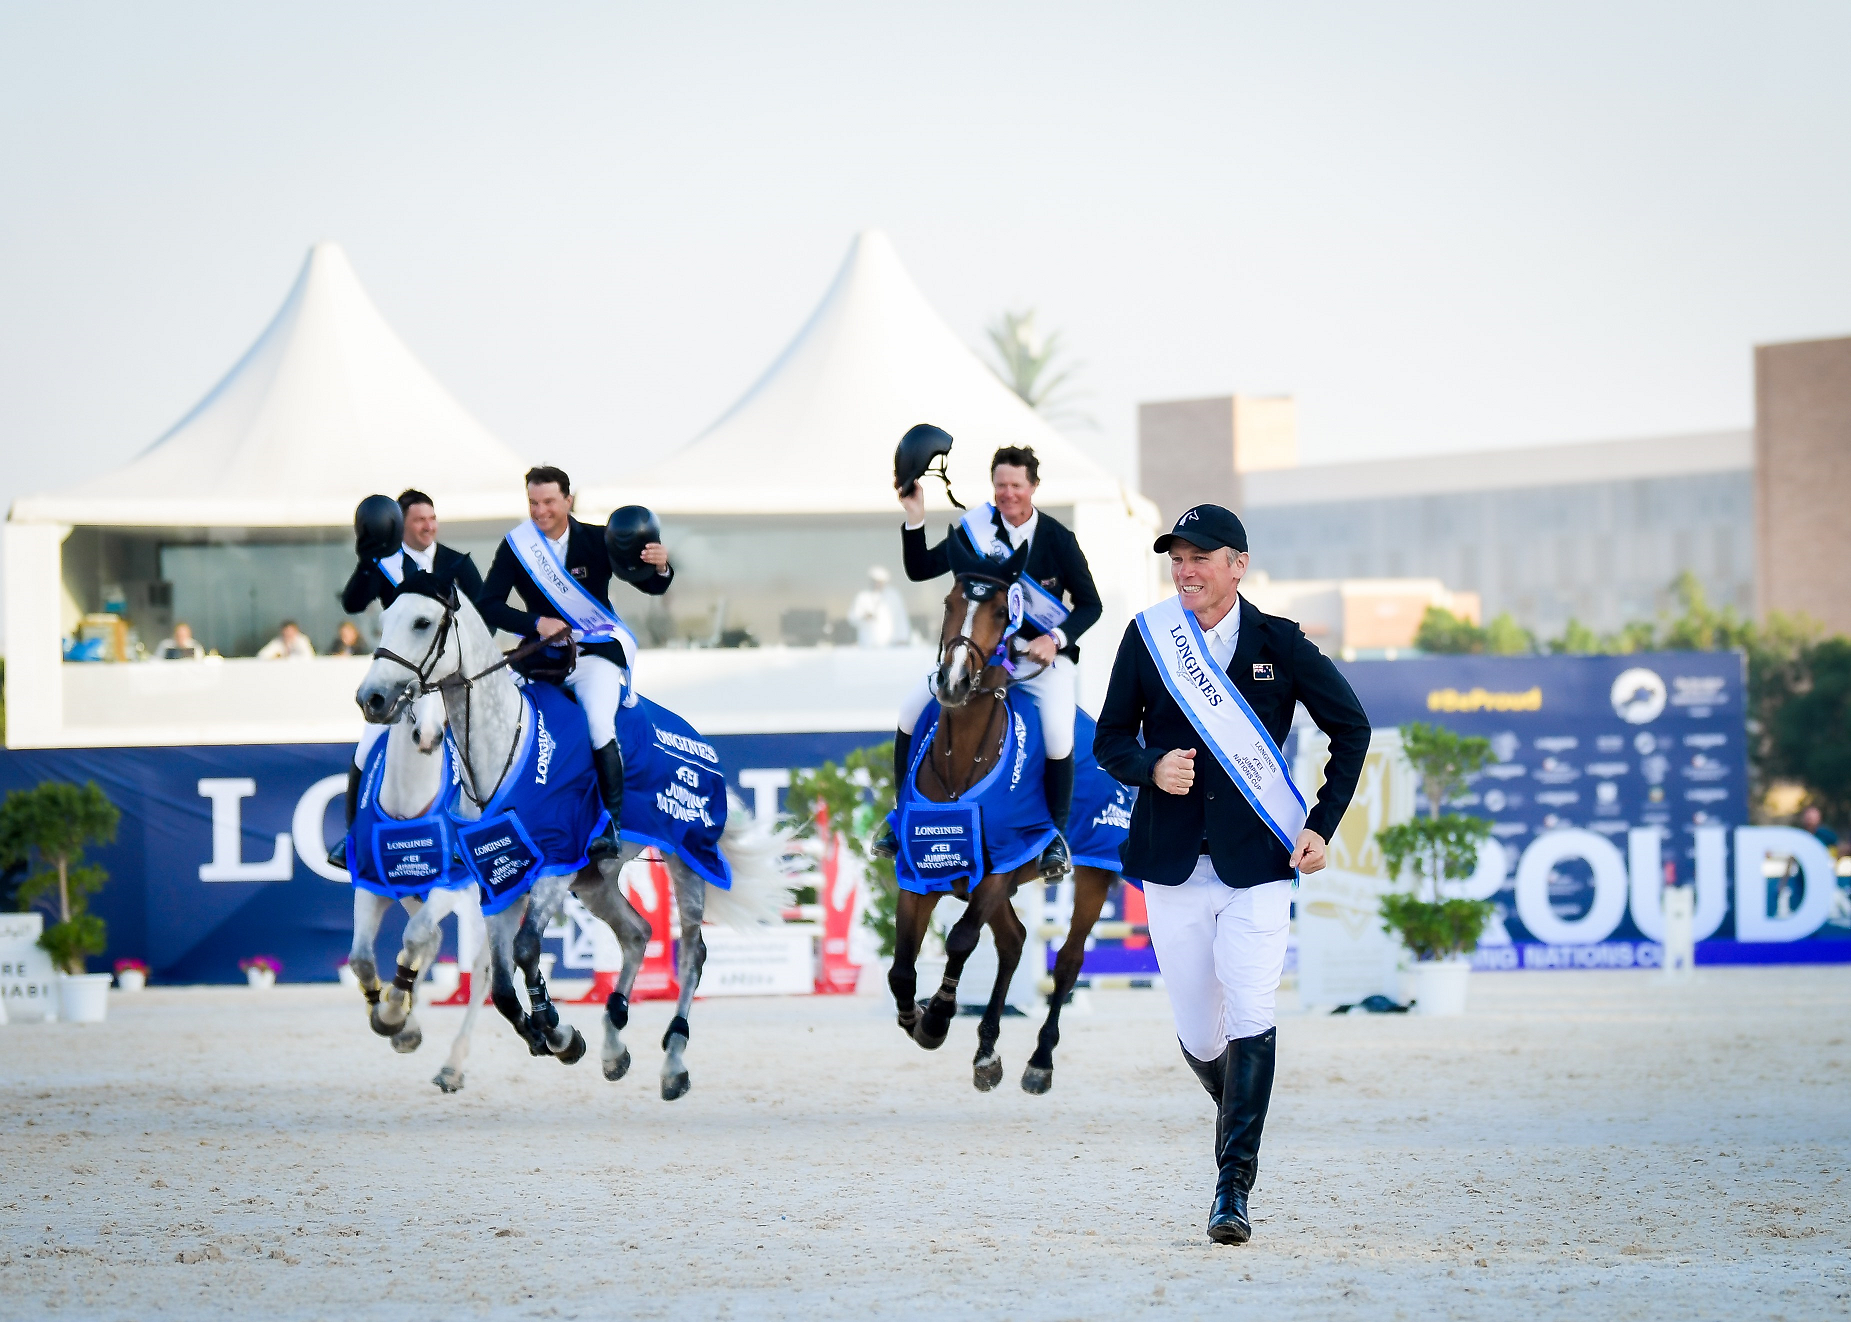 New Zealand celebrated victory at the FEI Nations Cup in Abu Dhabi ©FEI